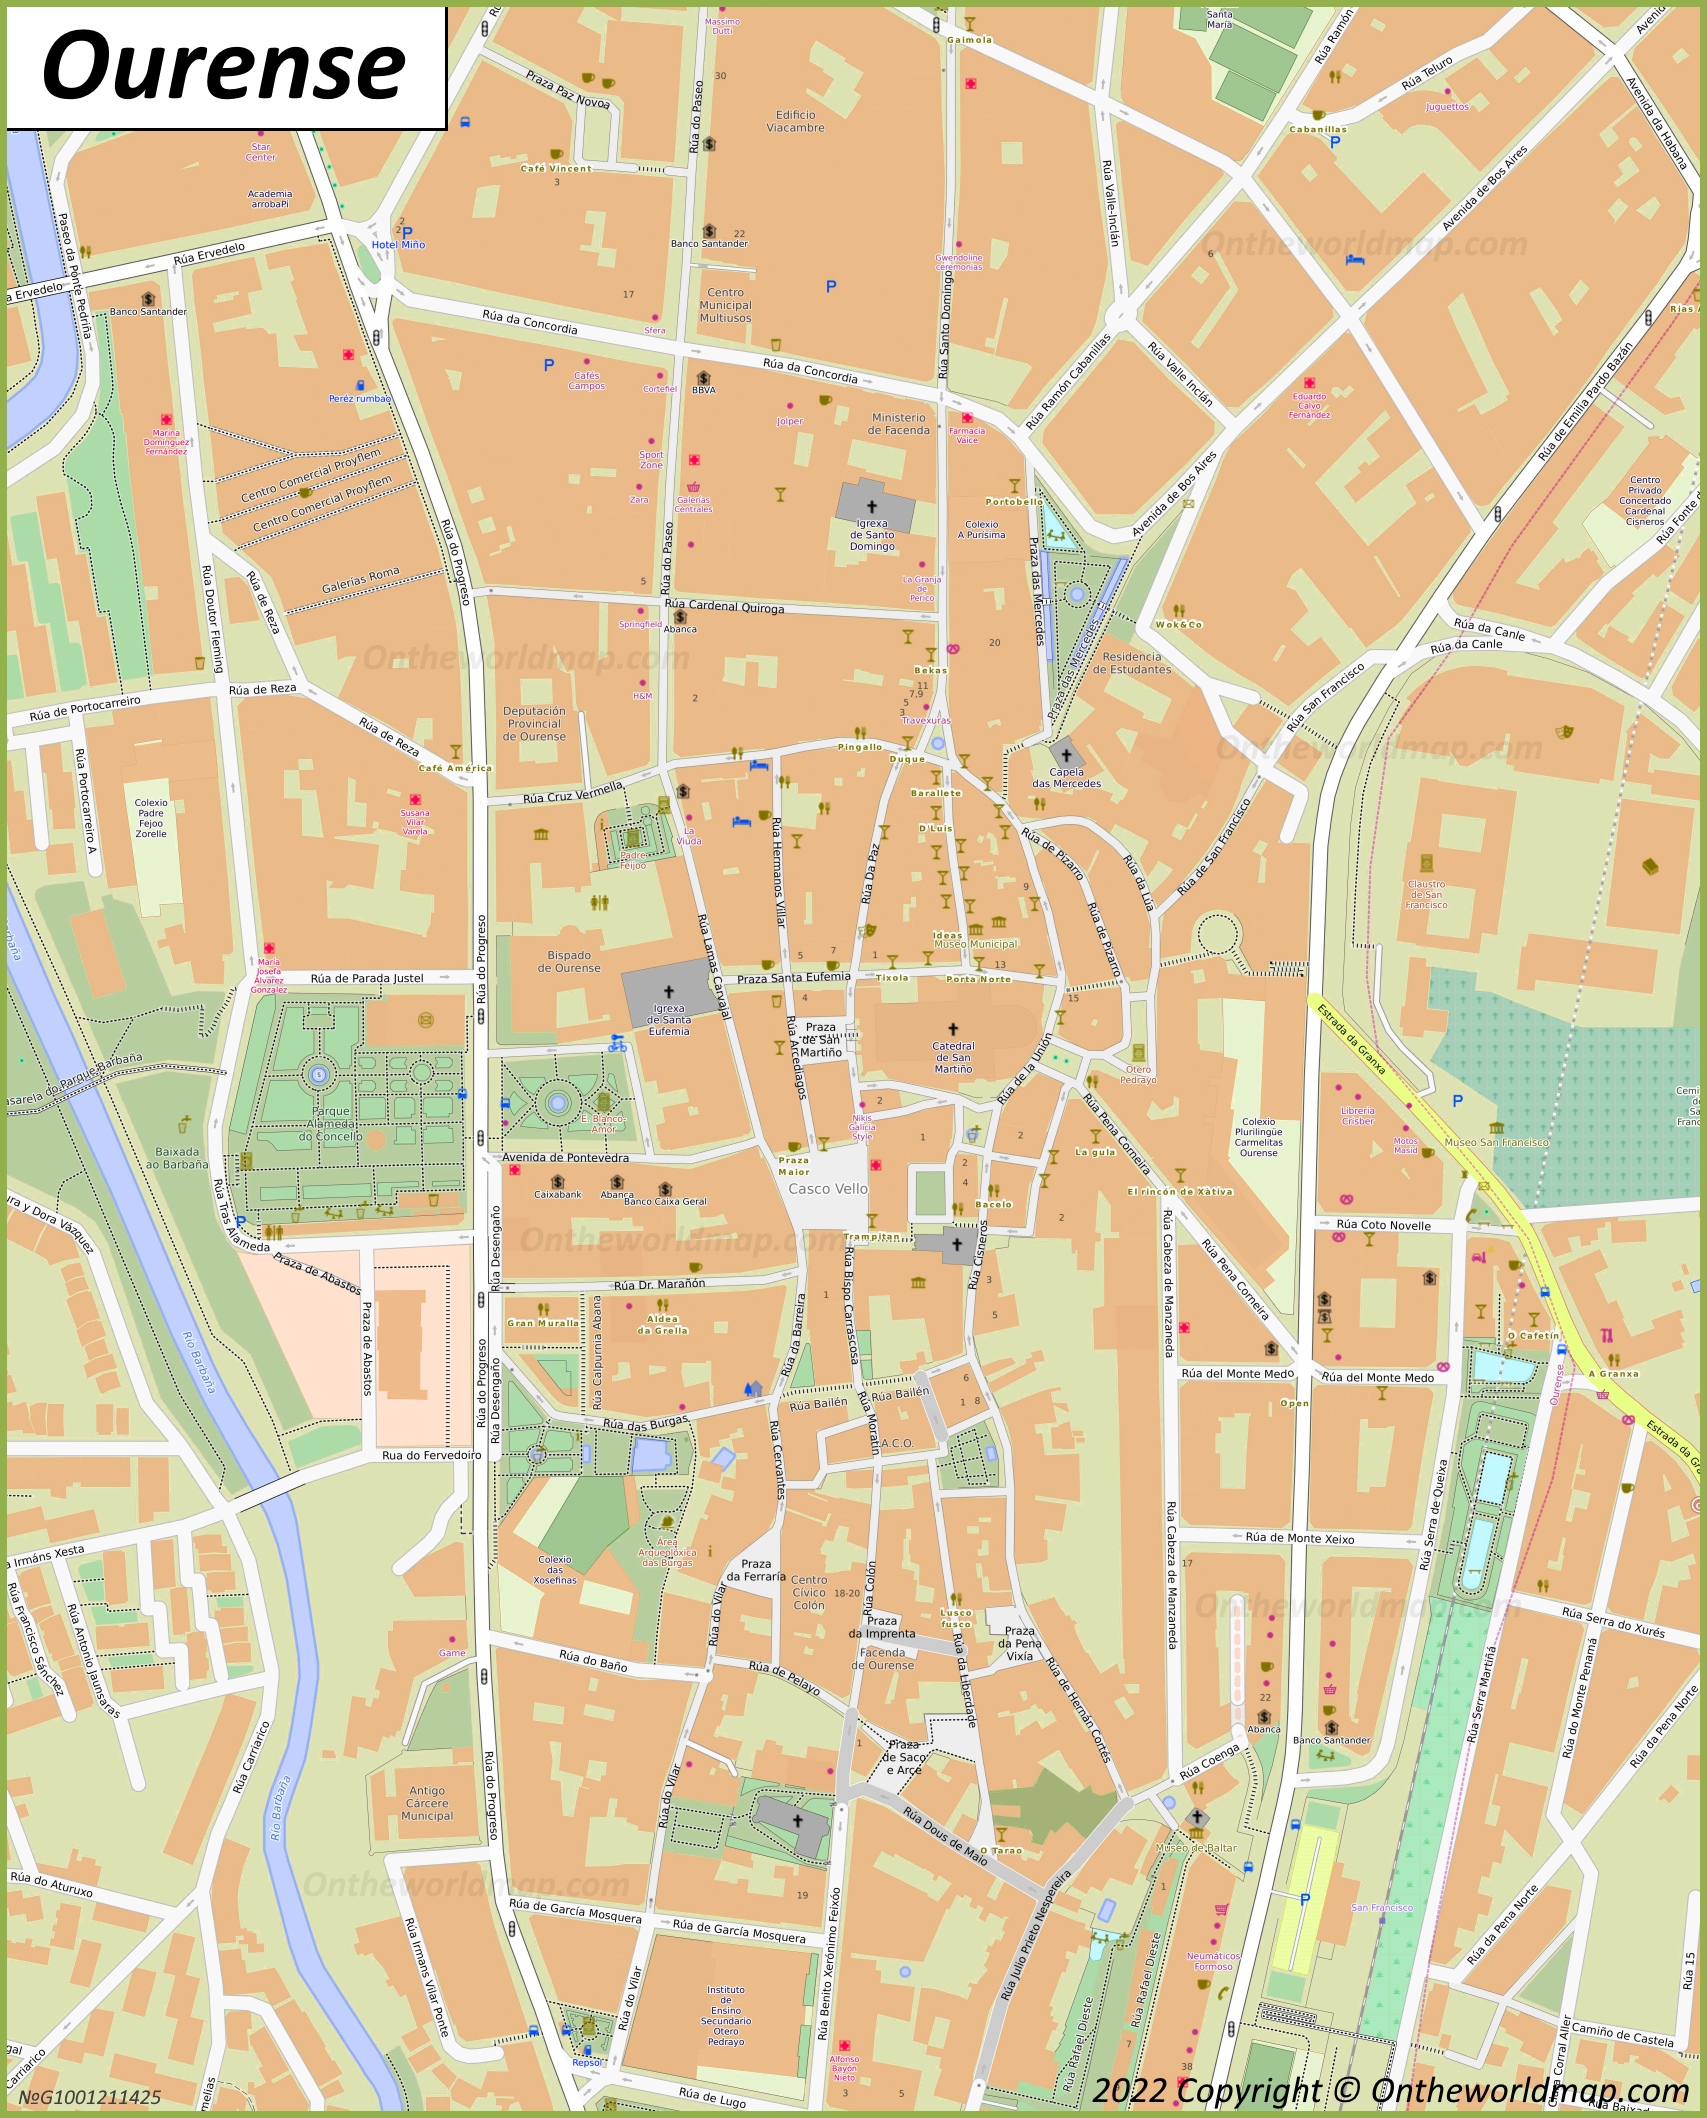 Ourense Old Town Map